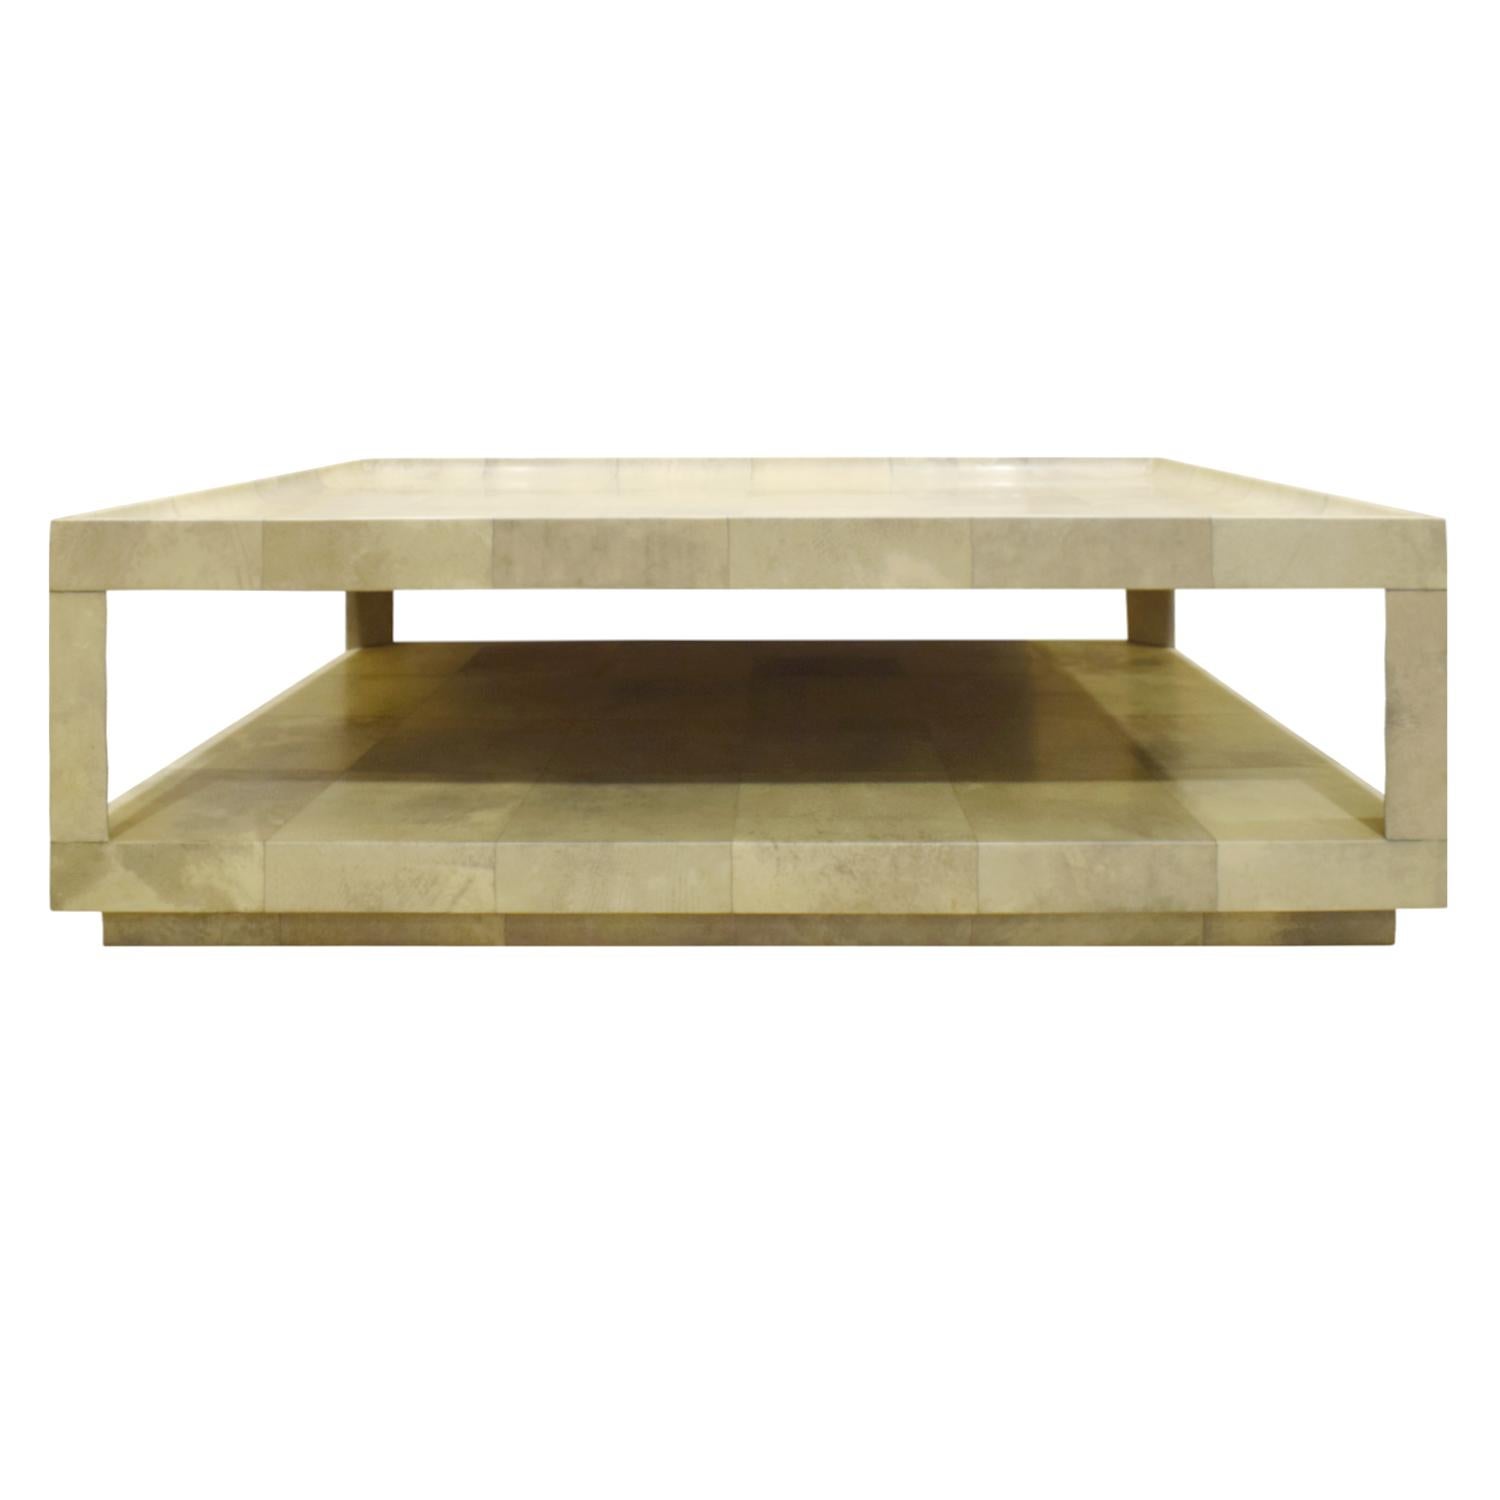 American Karl Springer Stunning Coffee Table in Lacquered Goatskin with Bone Inlays 1980s